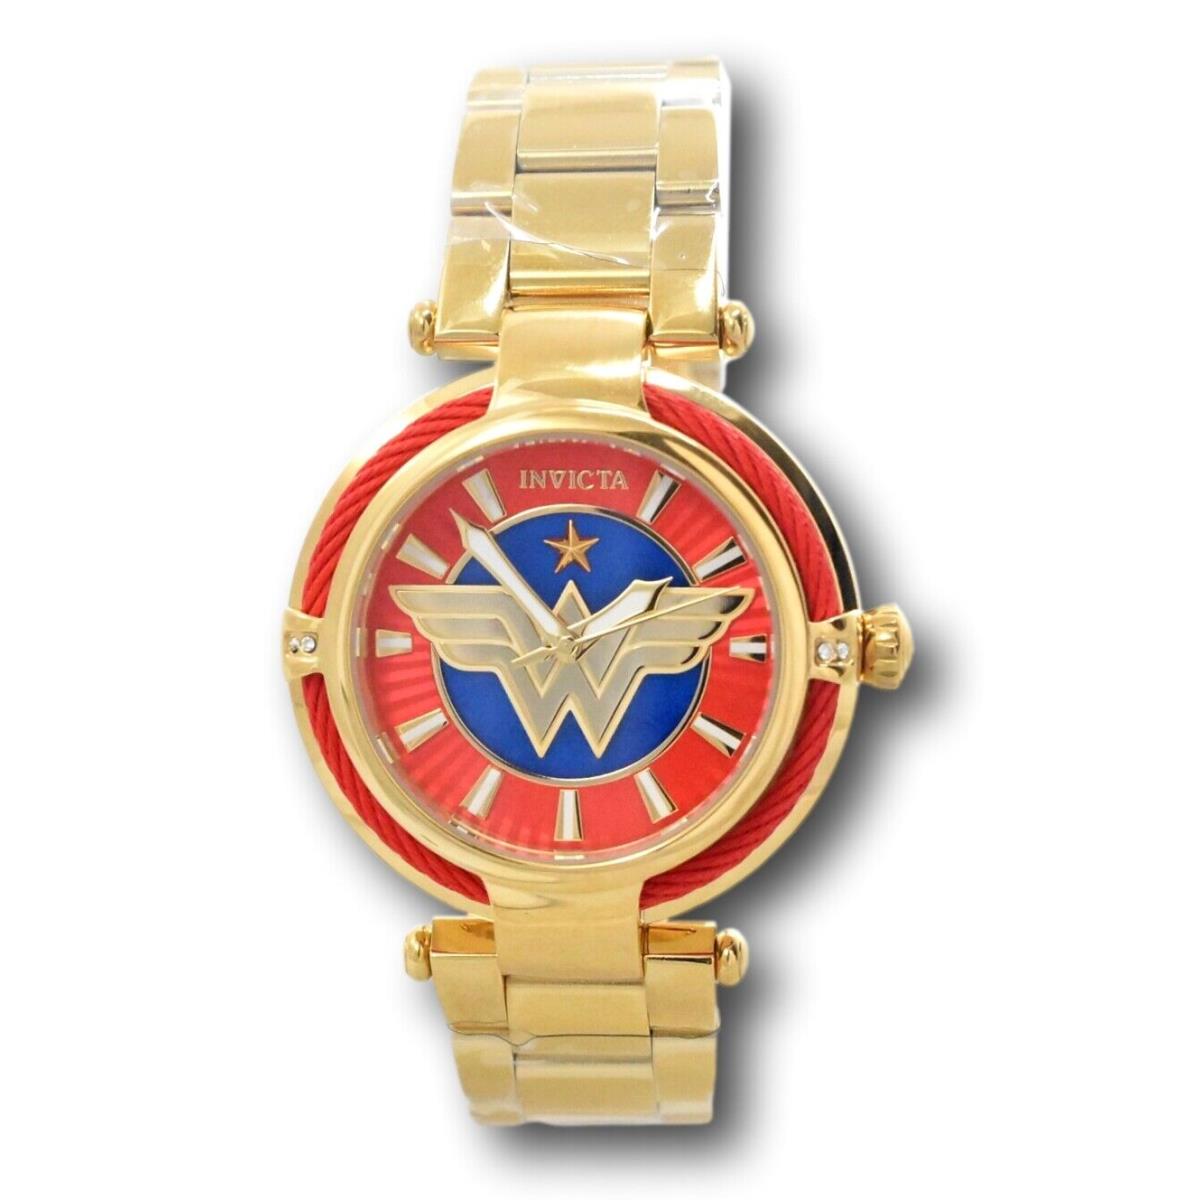 Invicta DC Comics Wonder Woman Ladies 40mm Limited Edition Mop Watch 34955 - Dial: Blue Gold Multicolor Red, Band: Gold Yellow, Bezel: Gold Red Yellow